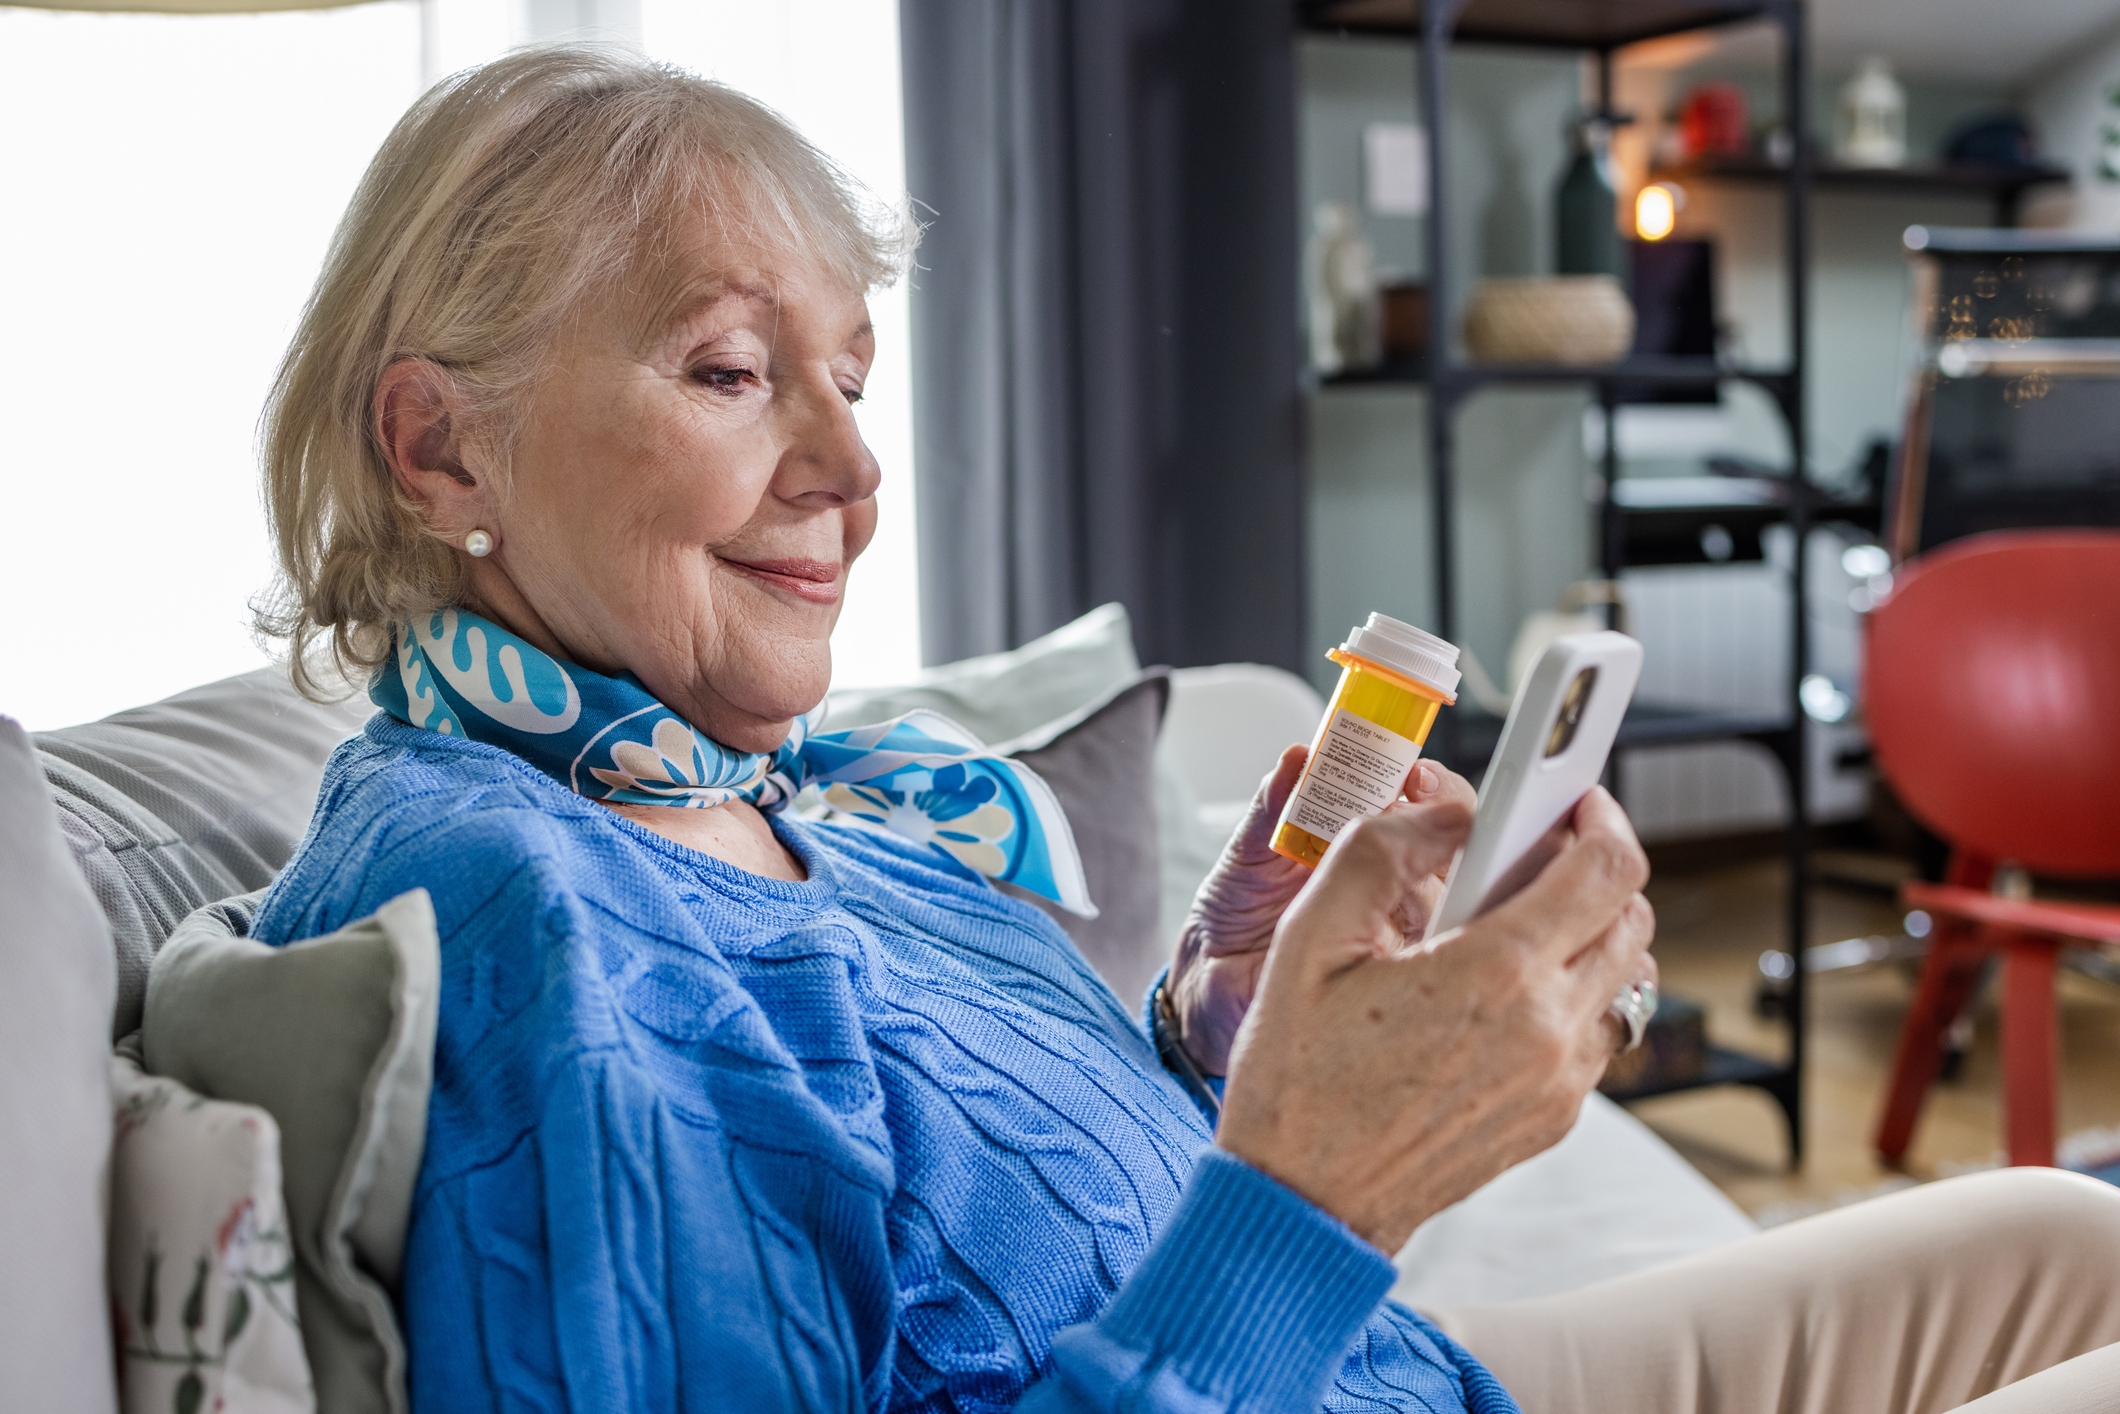 Photo a senior woman at home. She is holding a pill bottle and looking at a phone.